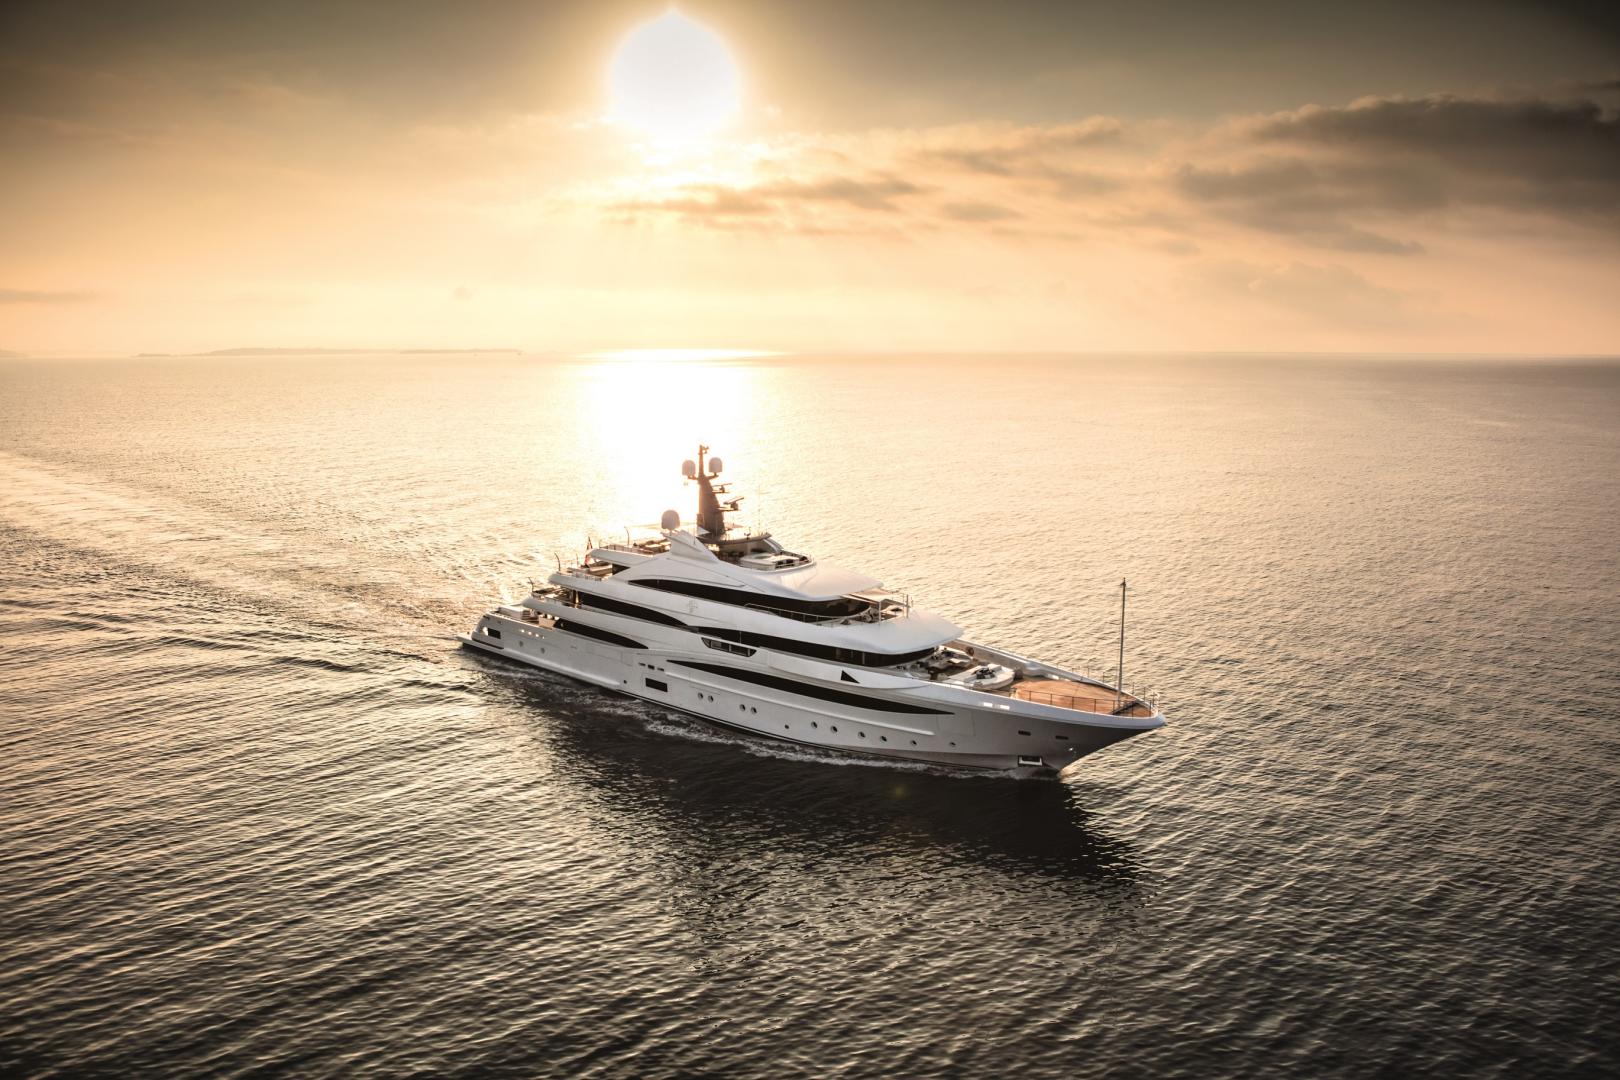 CRN Cloud9 is one of the finalists of the prestigious International Superyacht Society Design Awards